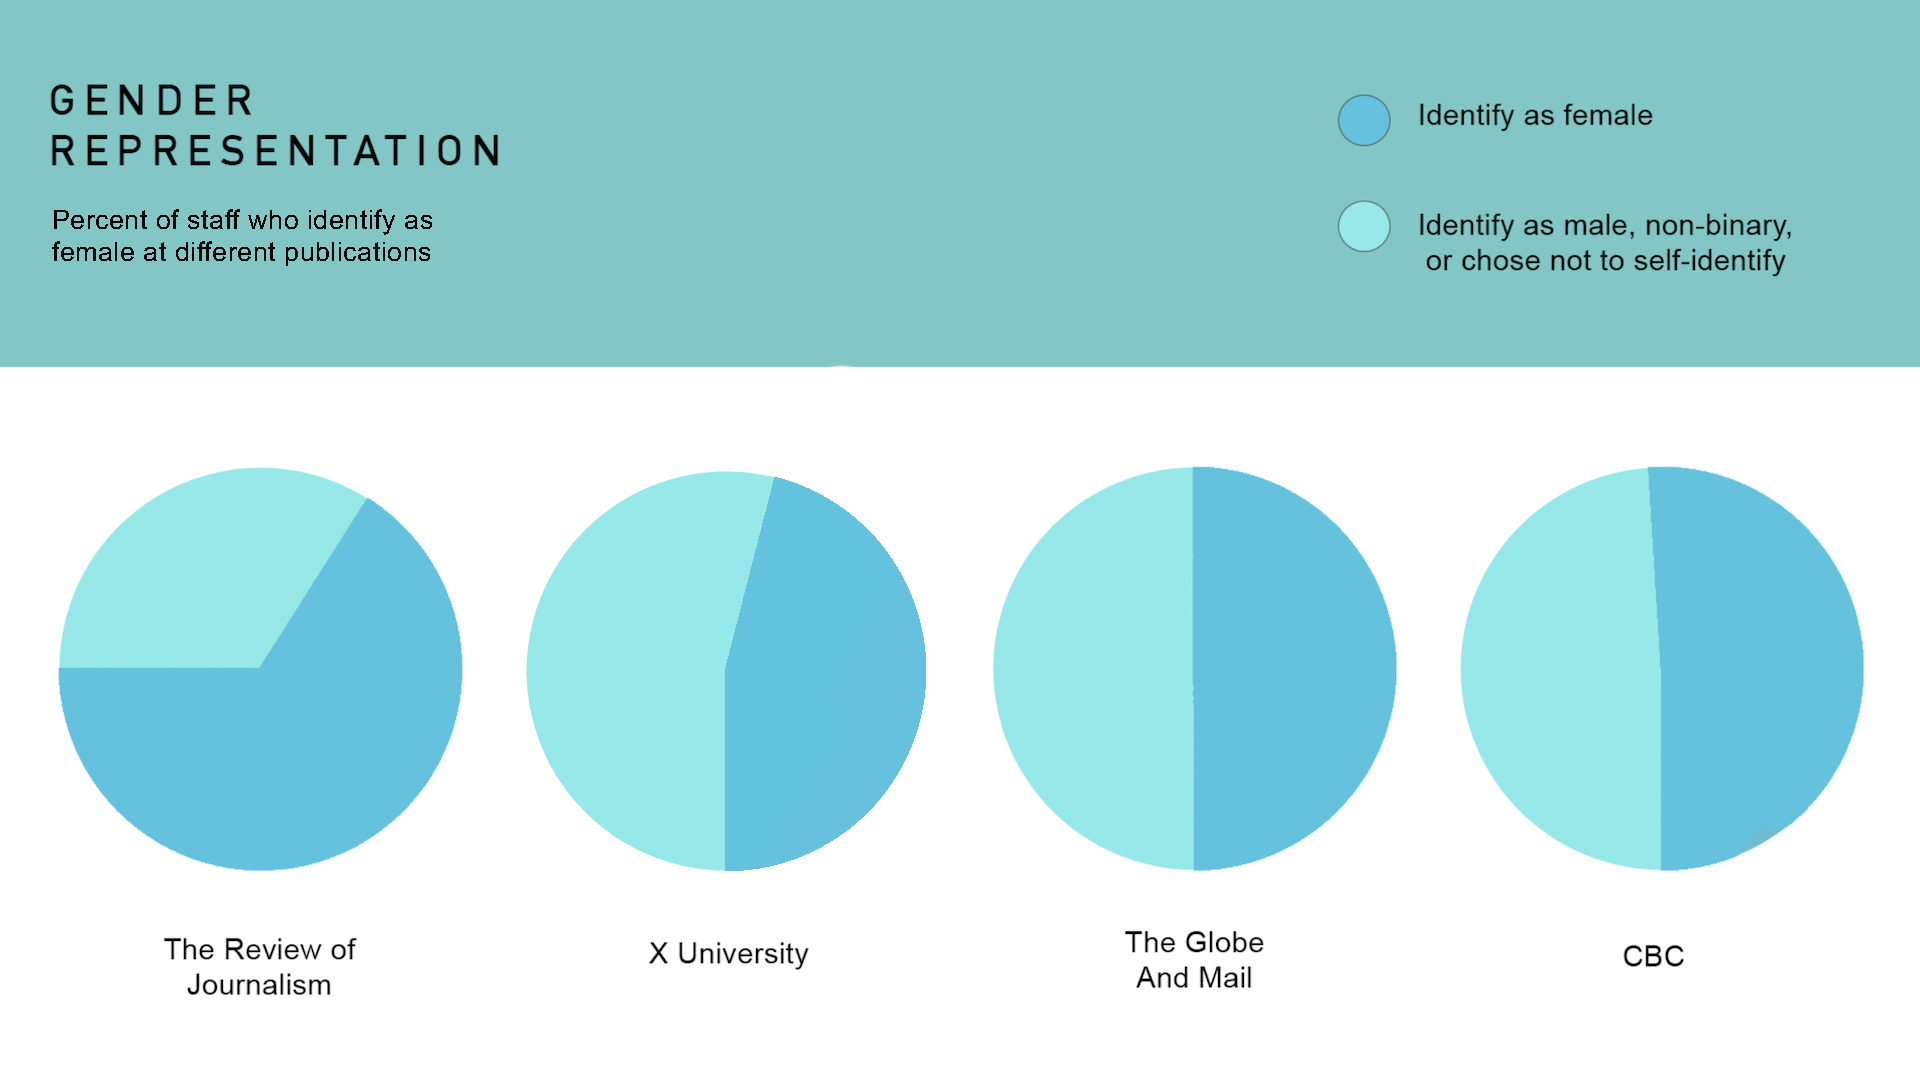 Four comparative pie charts representing the percentage of the staff who identify with gendered designations at The Review of Journalism, X University, The Globe and Mail, and CBC/Radio Canada.